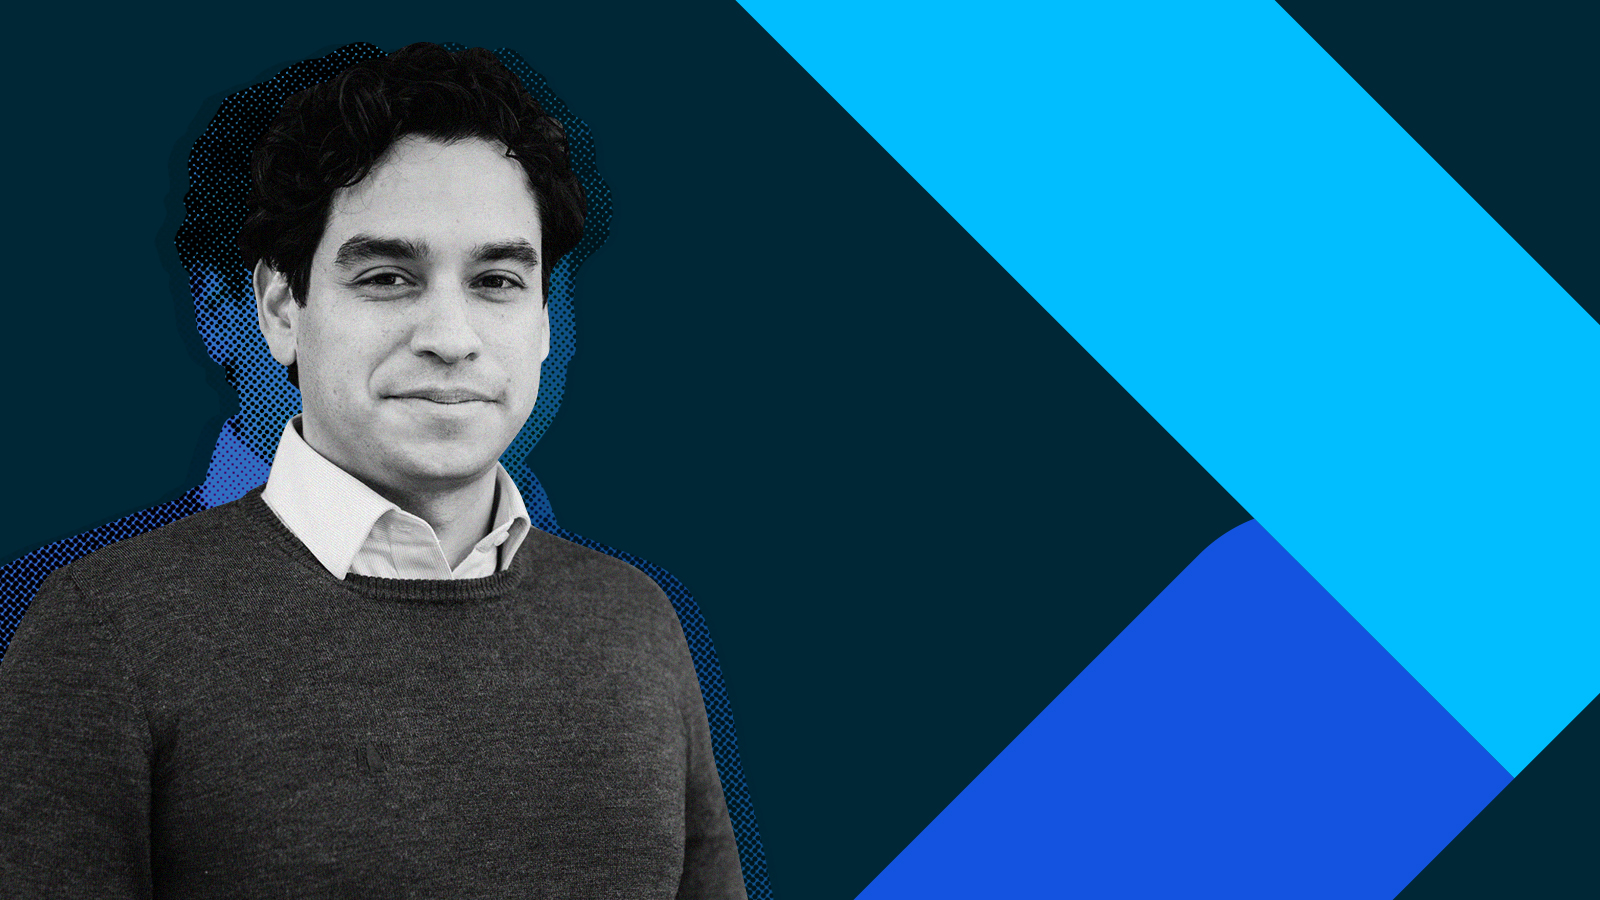 Josue Vivas tells us about his experience with the Tech Nation Visa